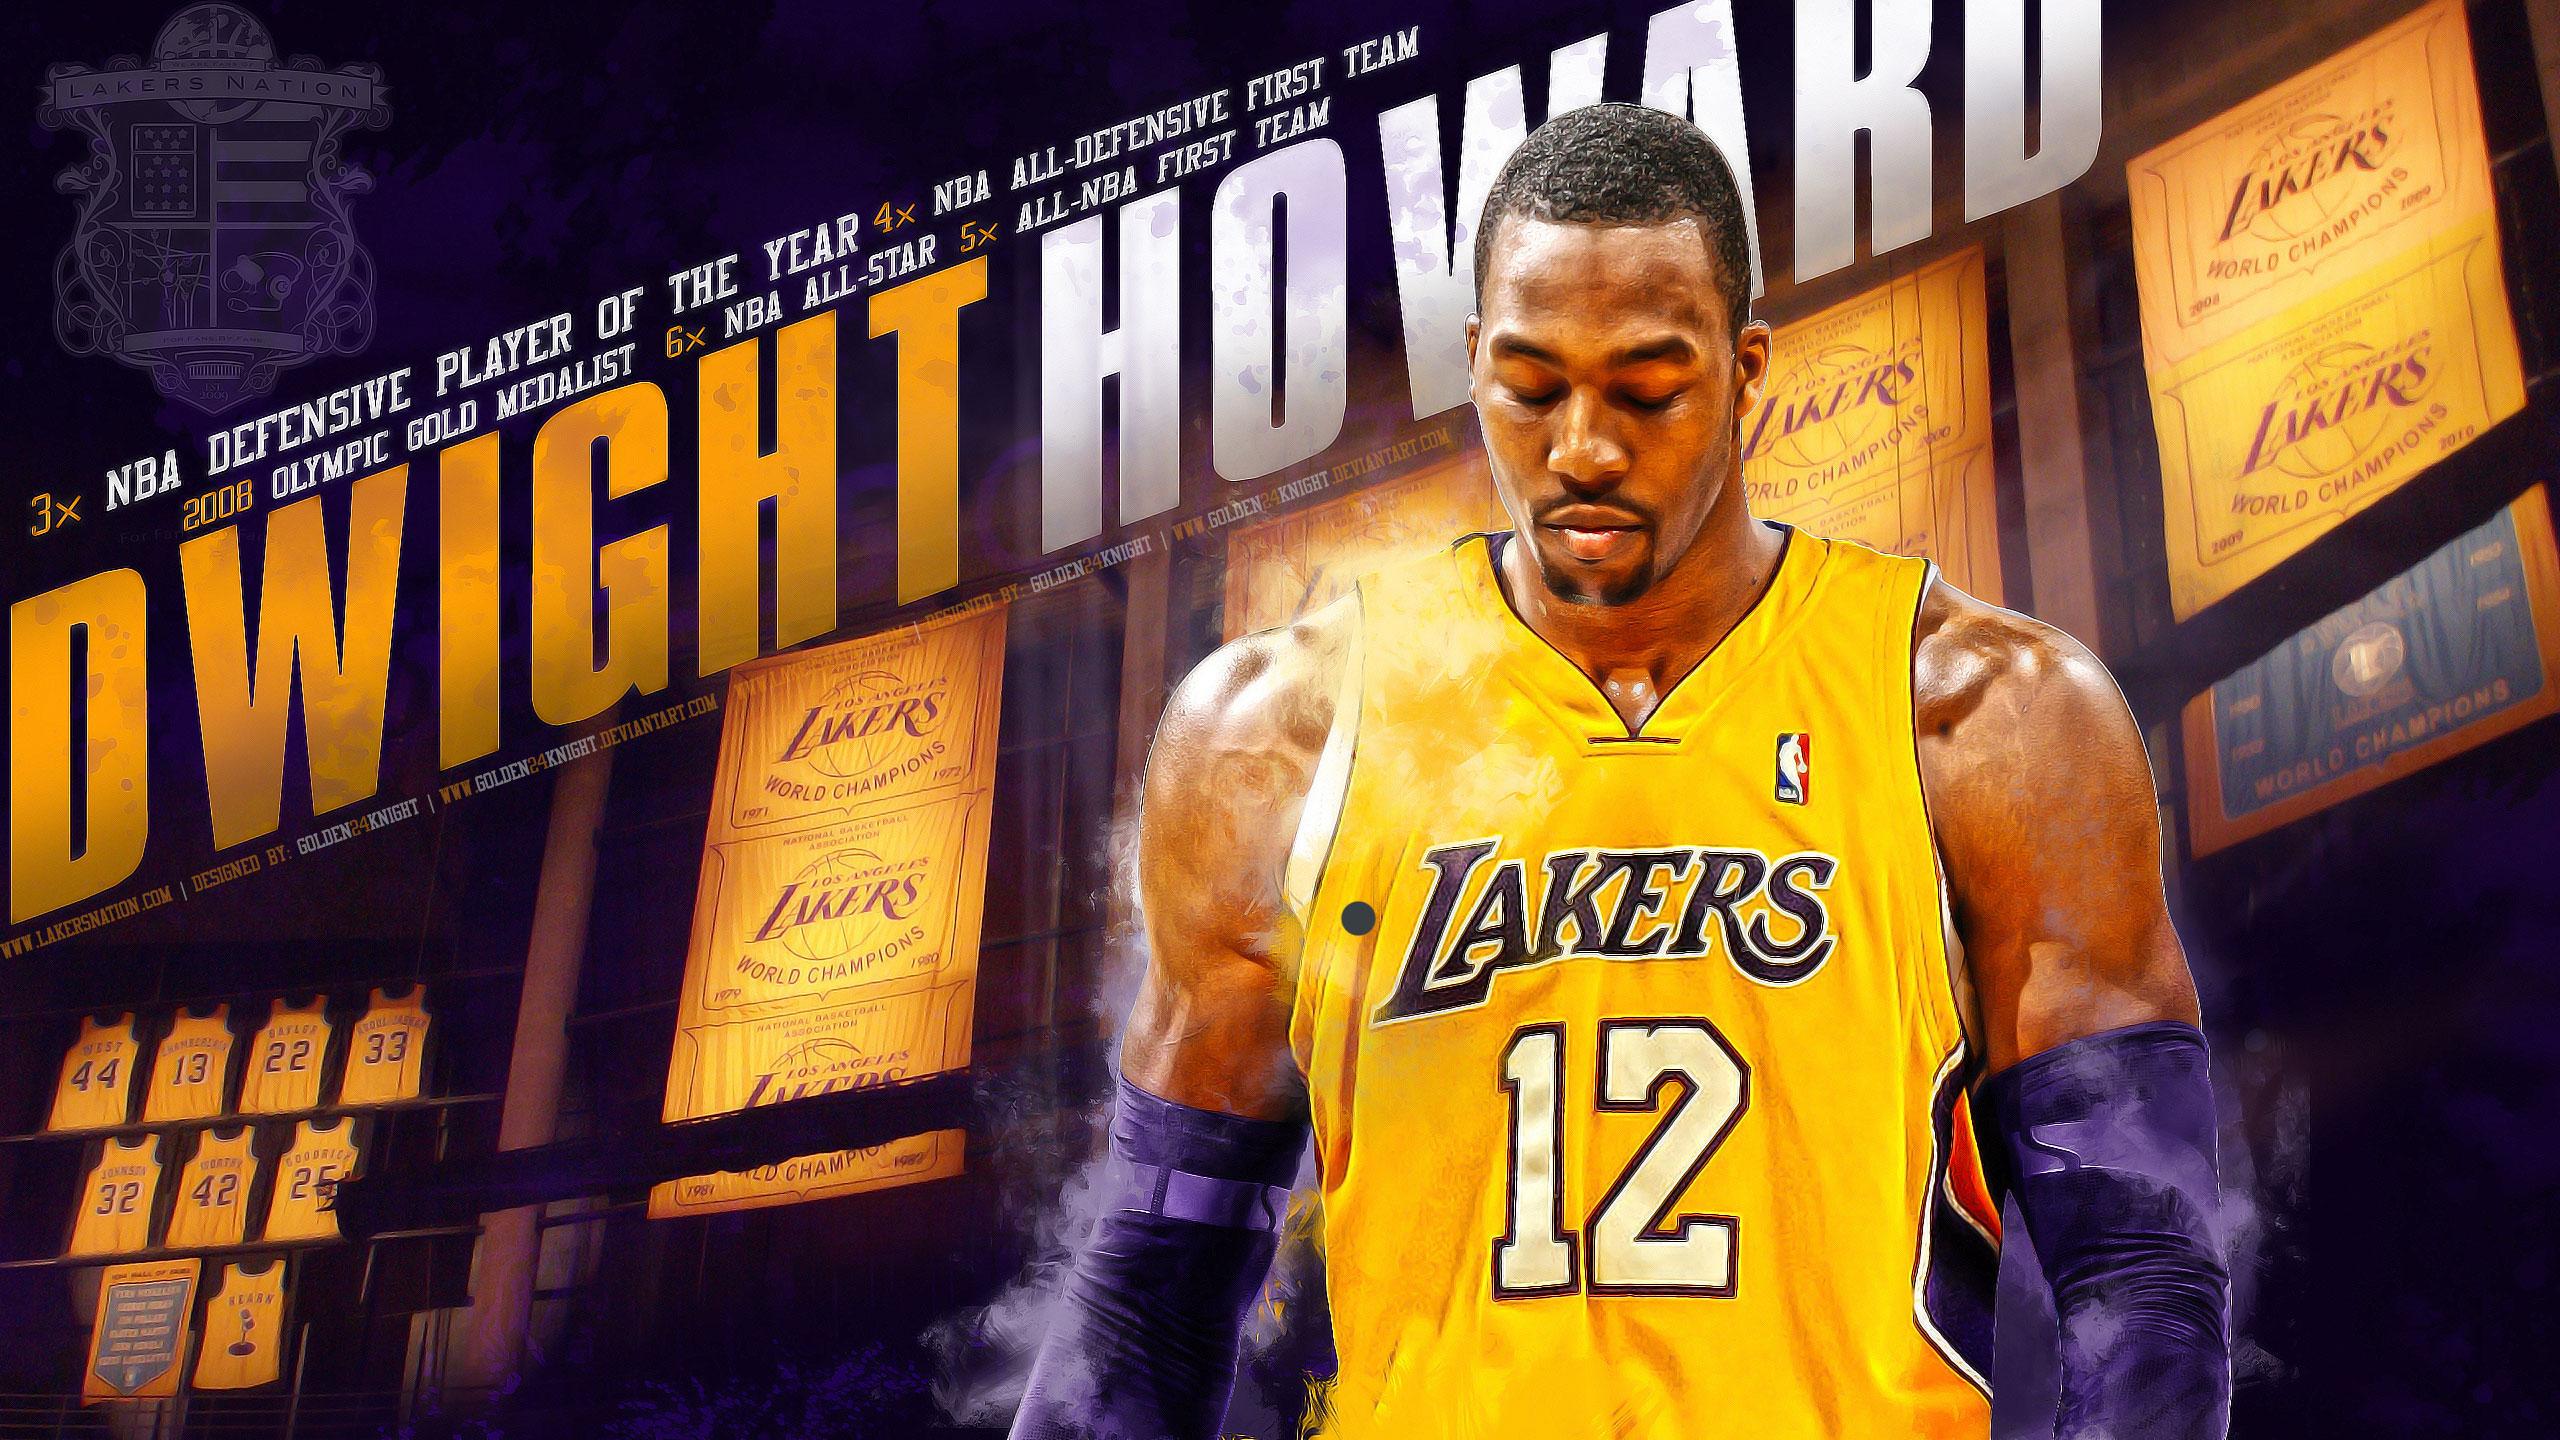 Lakers Wallpaper HD collection